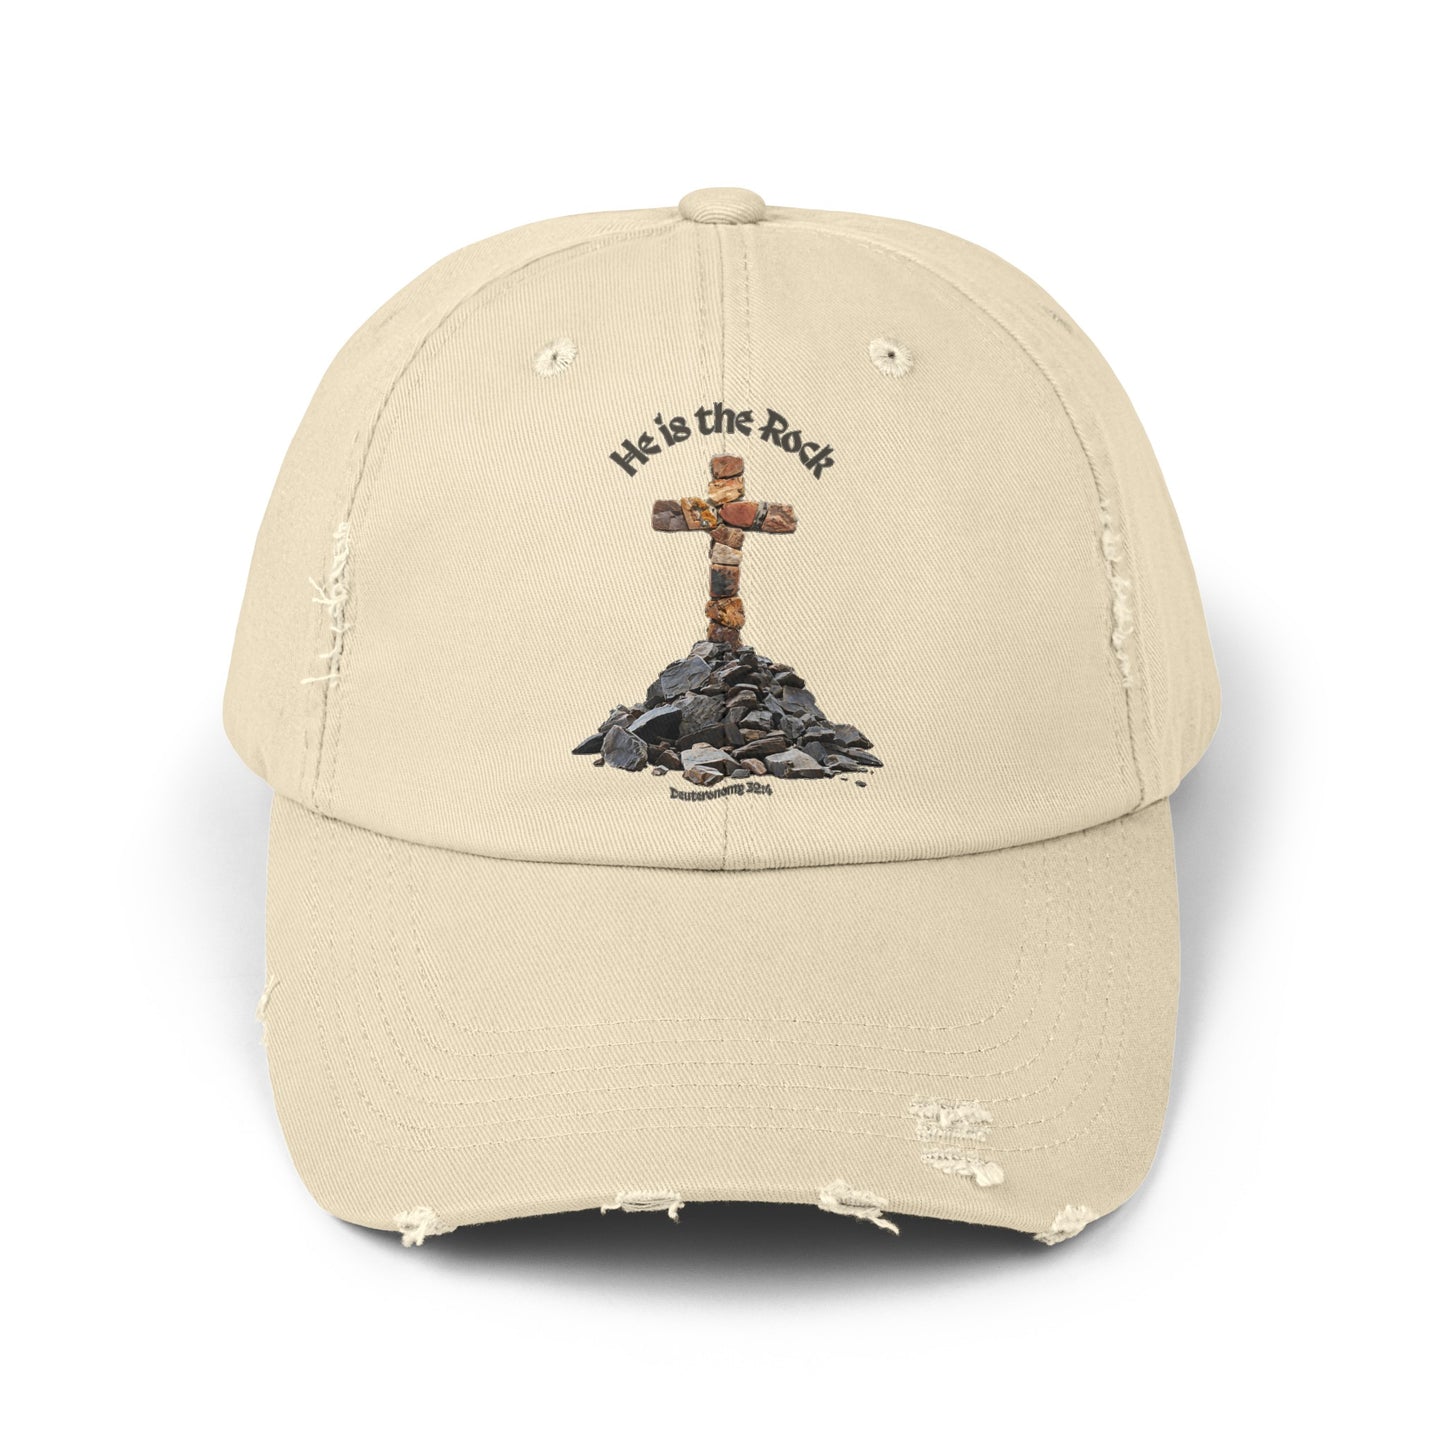 Distressed Cotton Cap with Crucifix Image and Bible Verse, 'He is the Rock' Deuteronomy 32:4, Low Profile Twill Hat, 3 Color Options